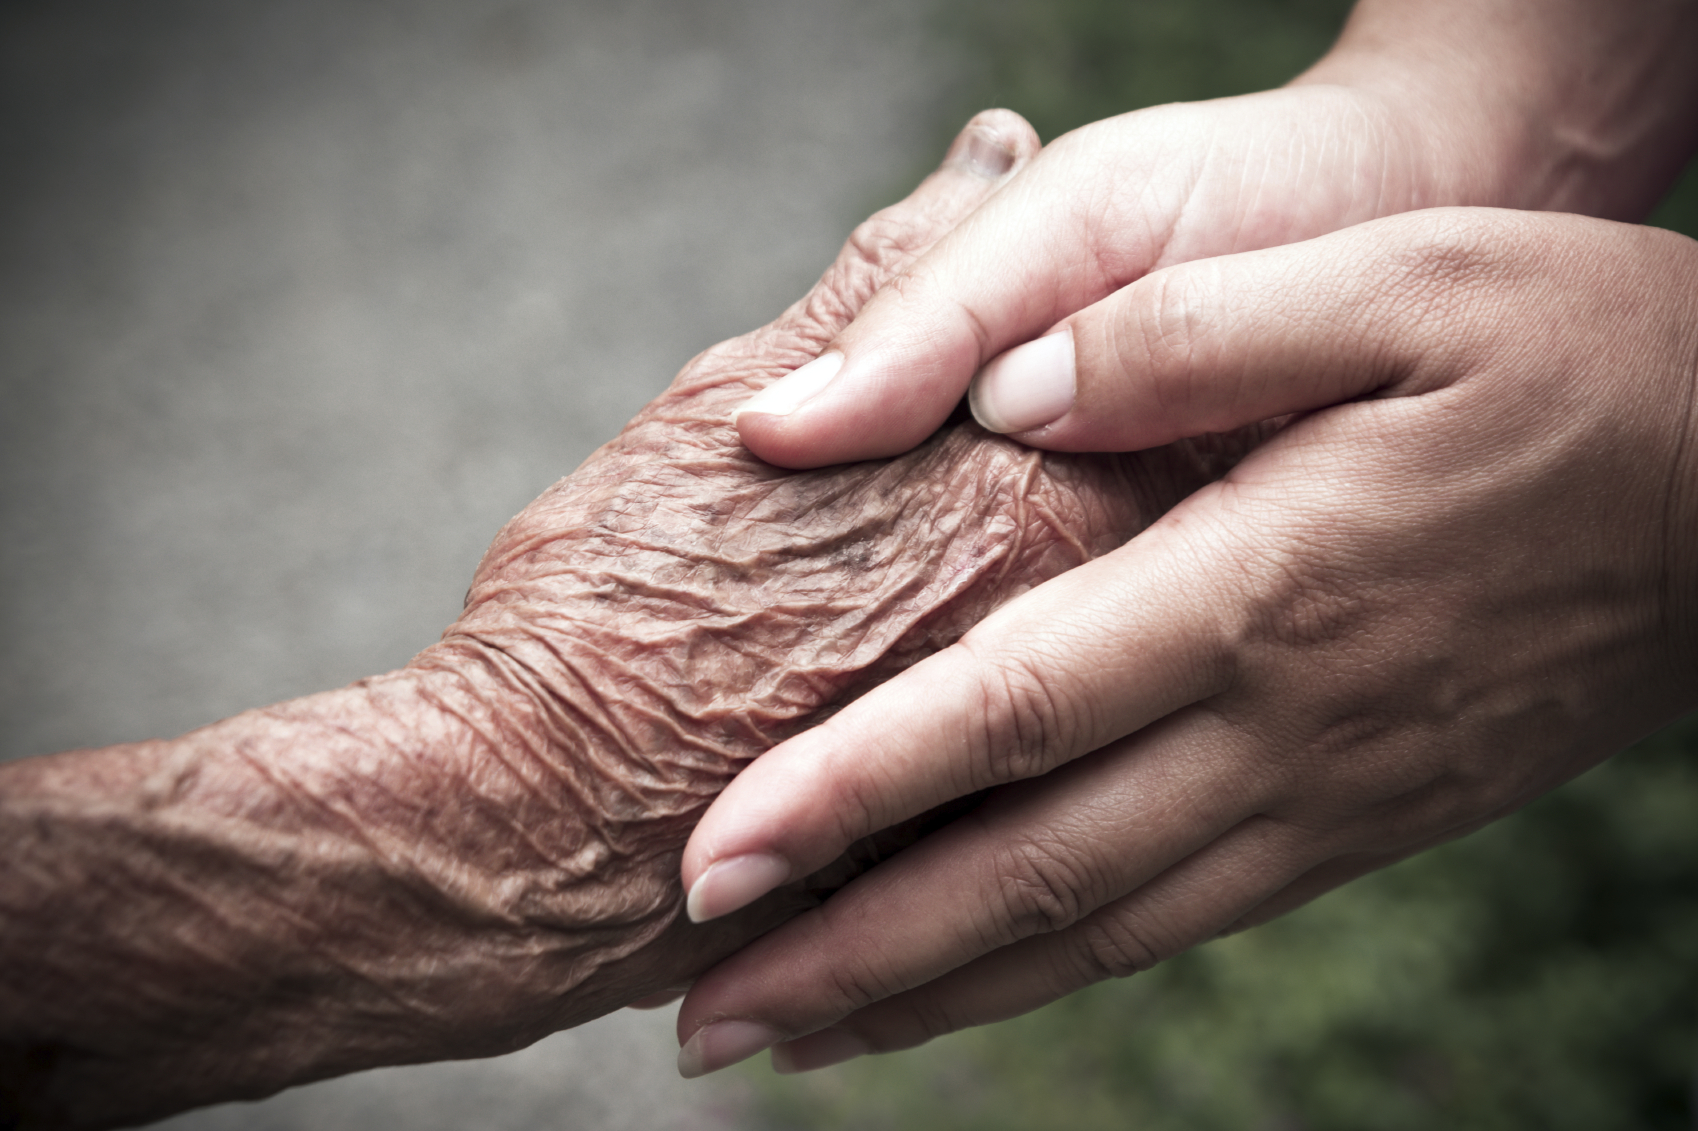 Caring for the caregivers: Who is meeting the care needs of older adults?